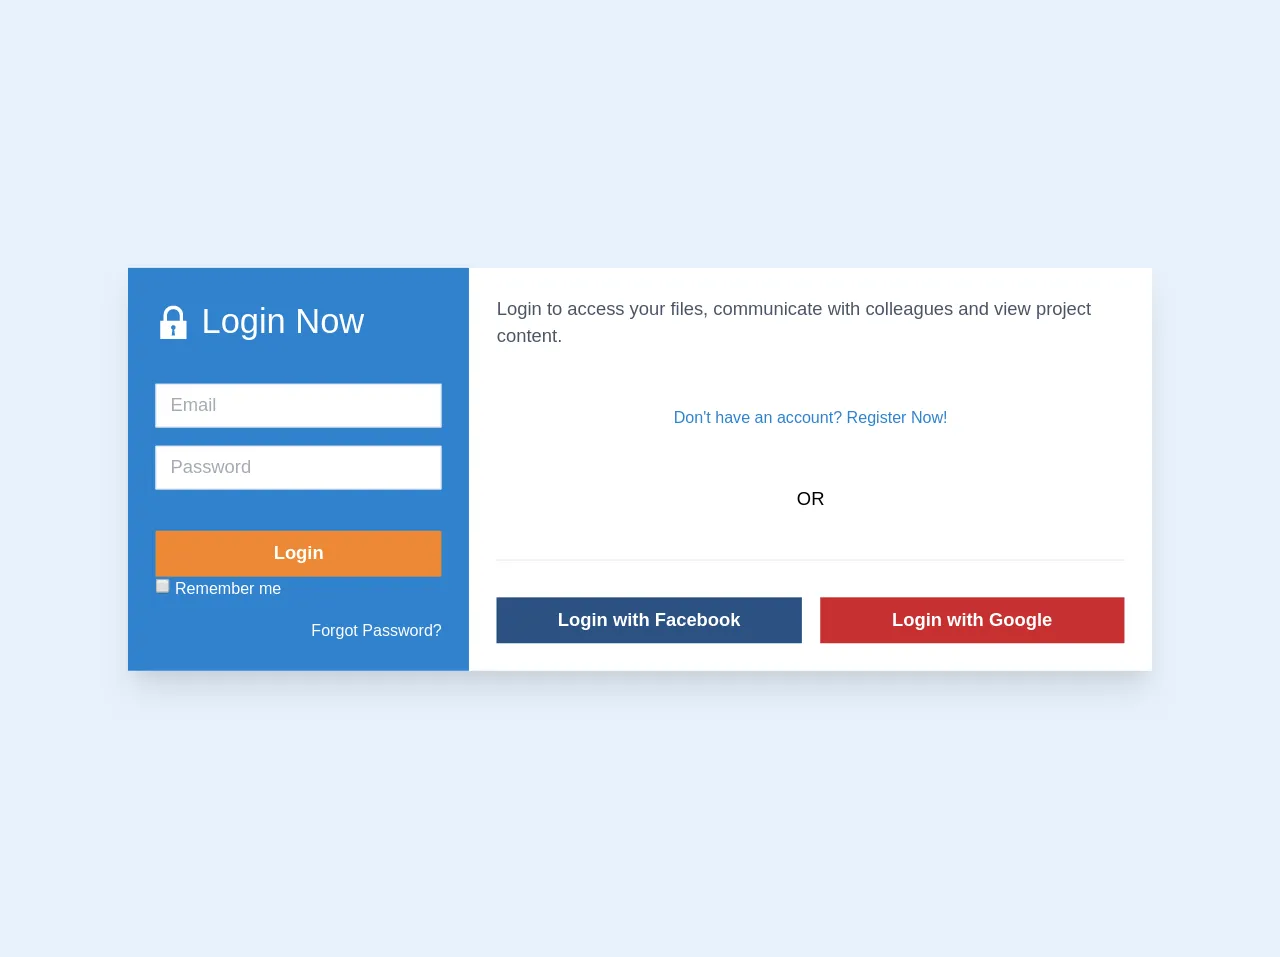 Native and social login form